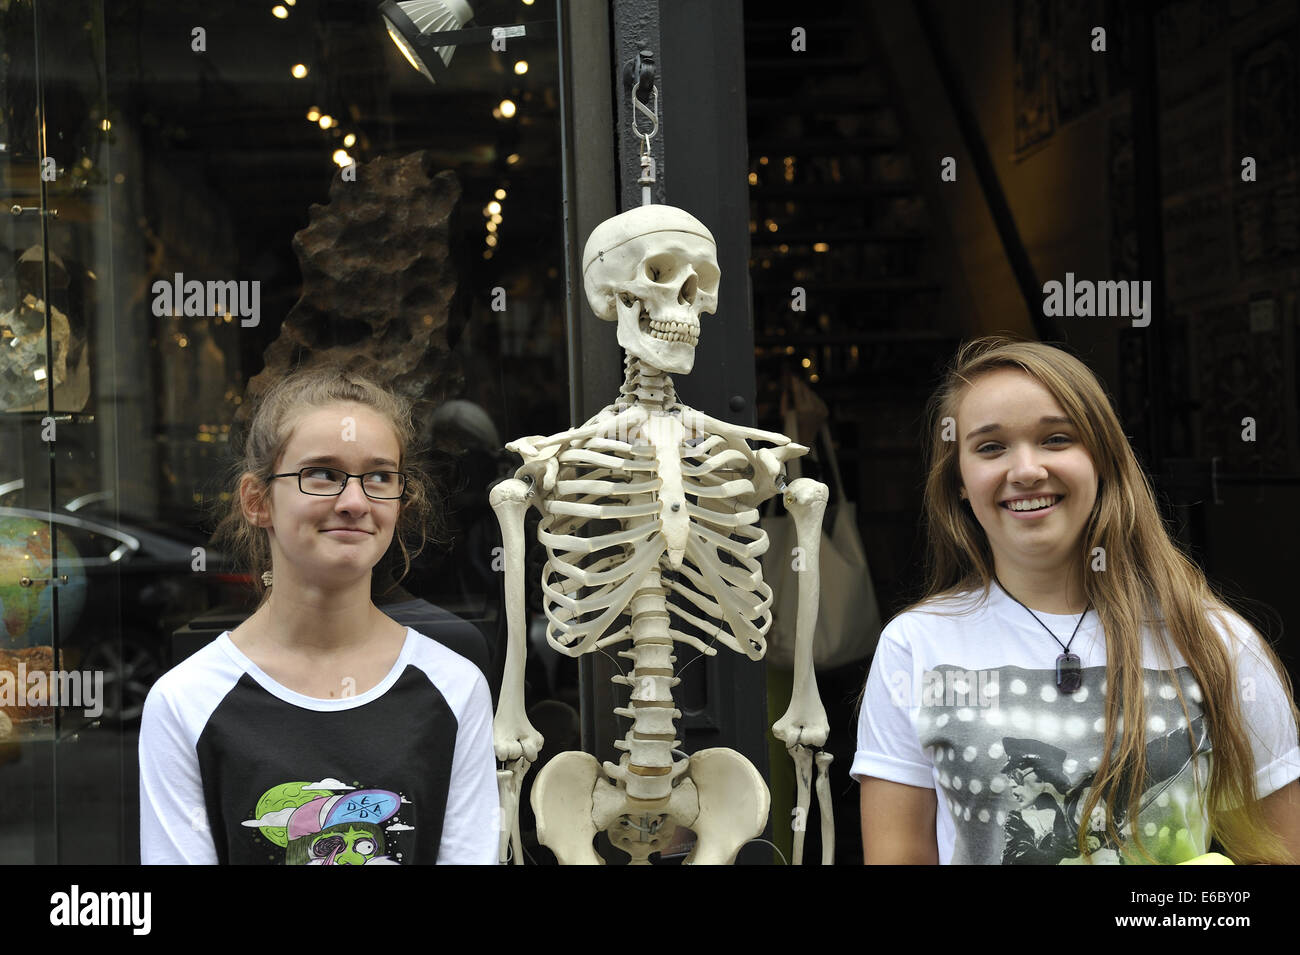 12 year old and 15 year old sisters posing with human skeleton. Manhattan, New York Stock Photo